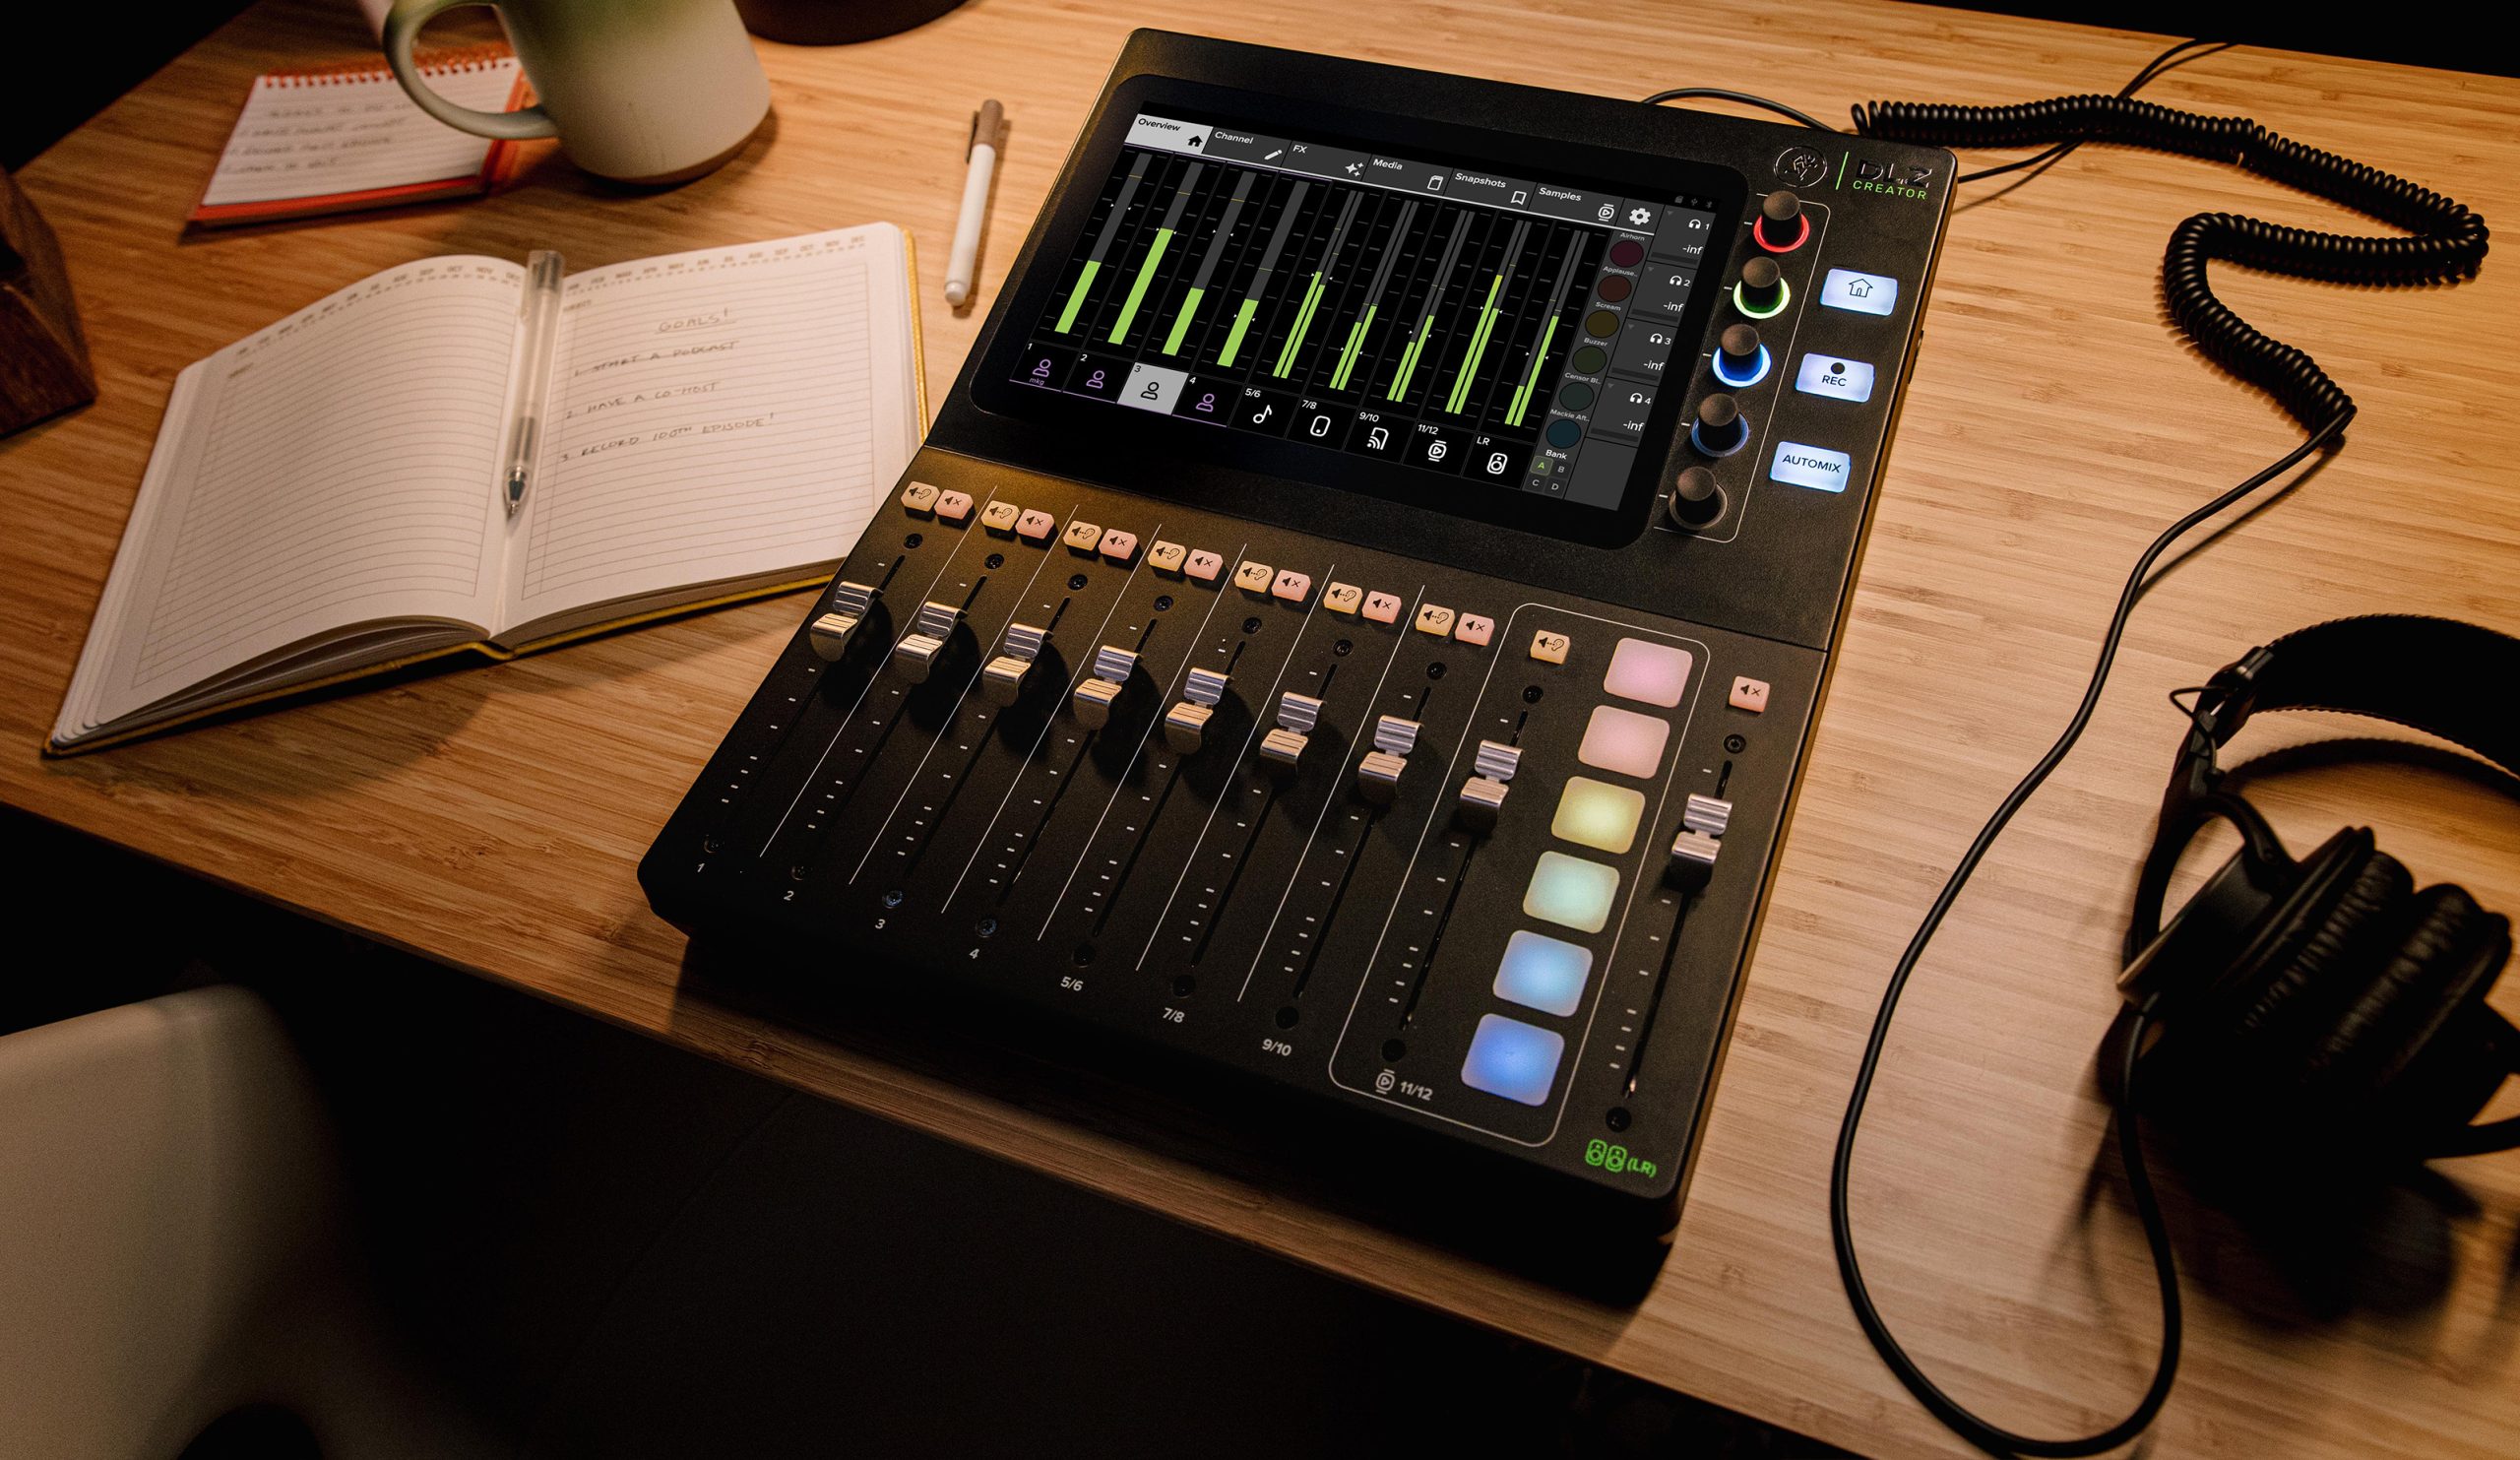 DLZ CREATOR
ADAPTIVE DIGITAL MIXER
FOR PODCASTING AND STREAMING